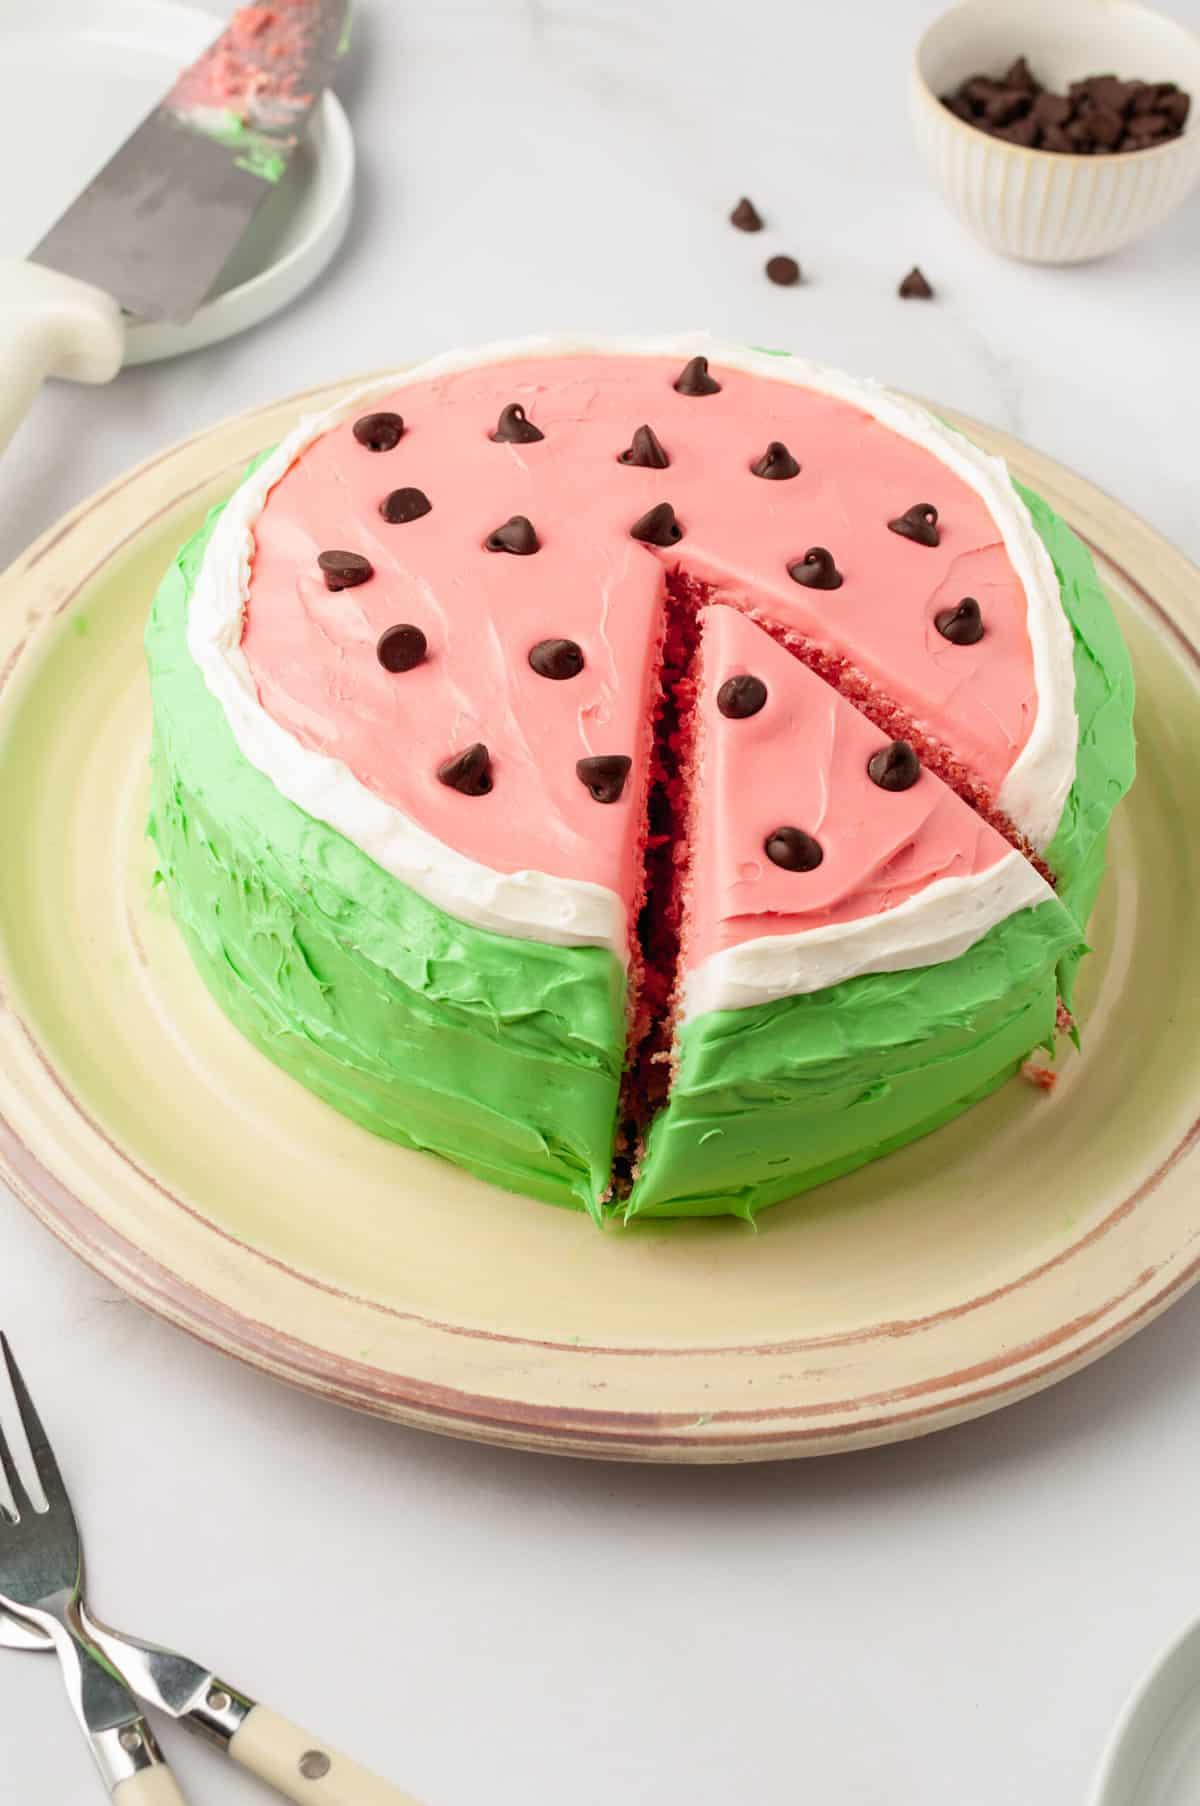 A watermelon cake is shown on a beige plate with a slice being cut out.